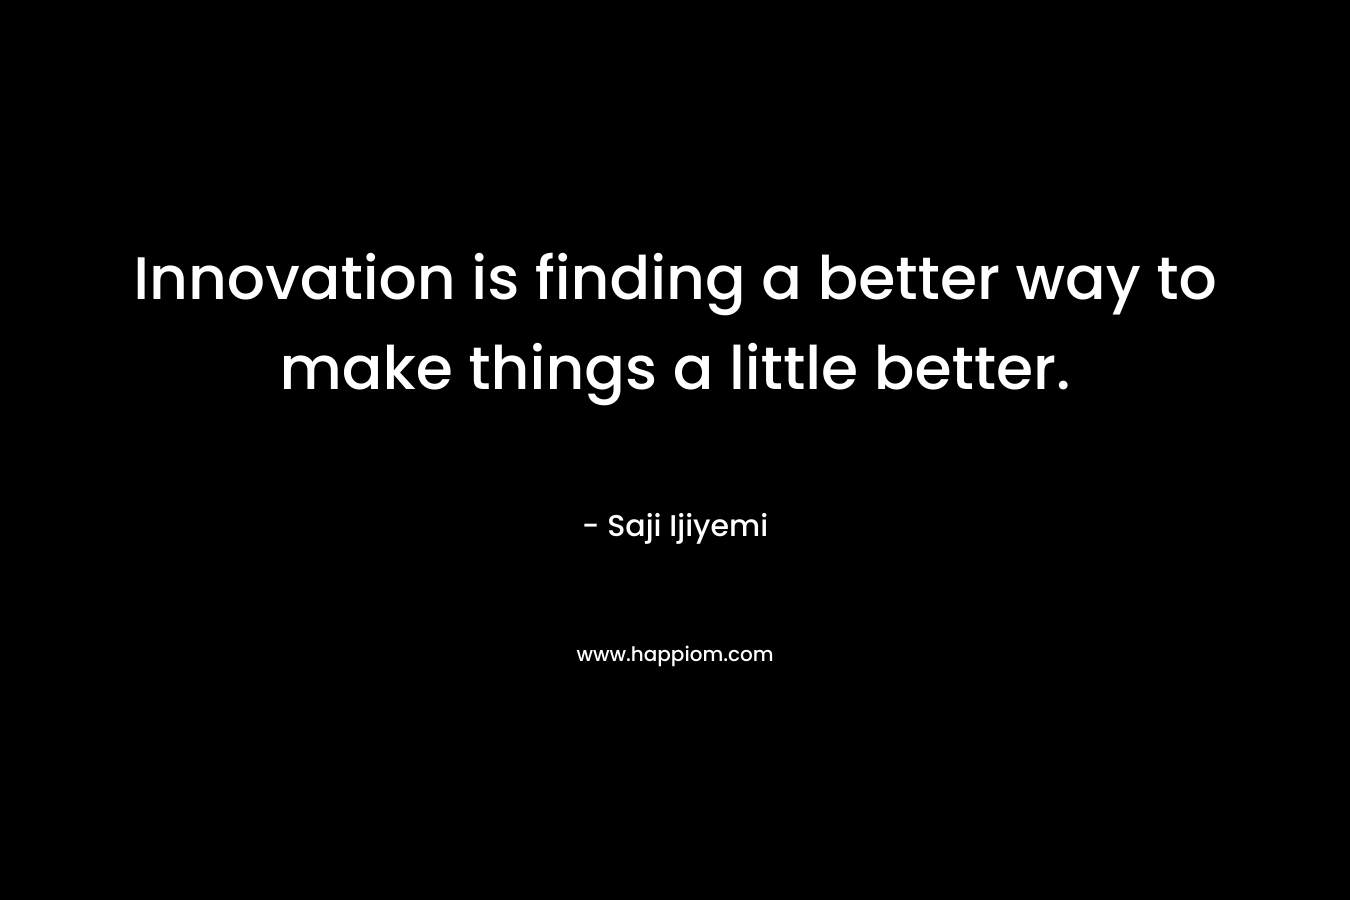 Innovation is finding a better way to make things a little better.